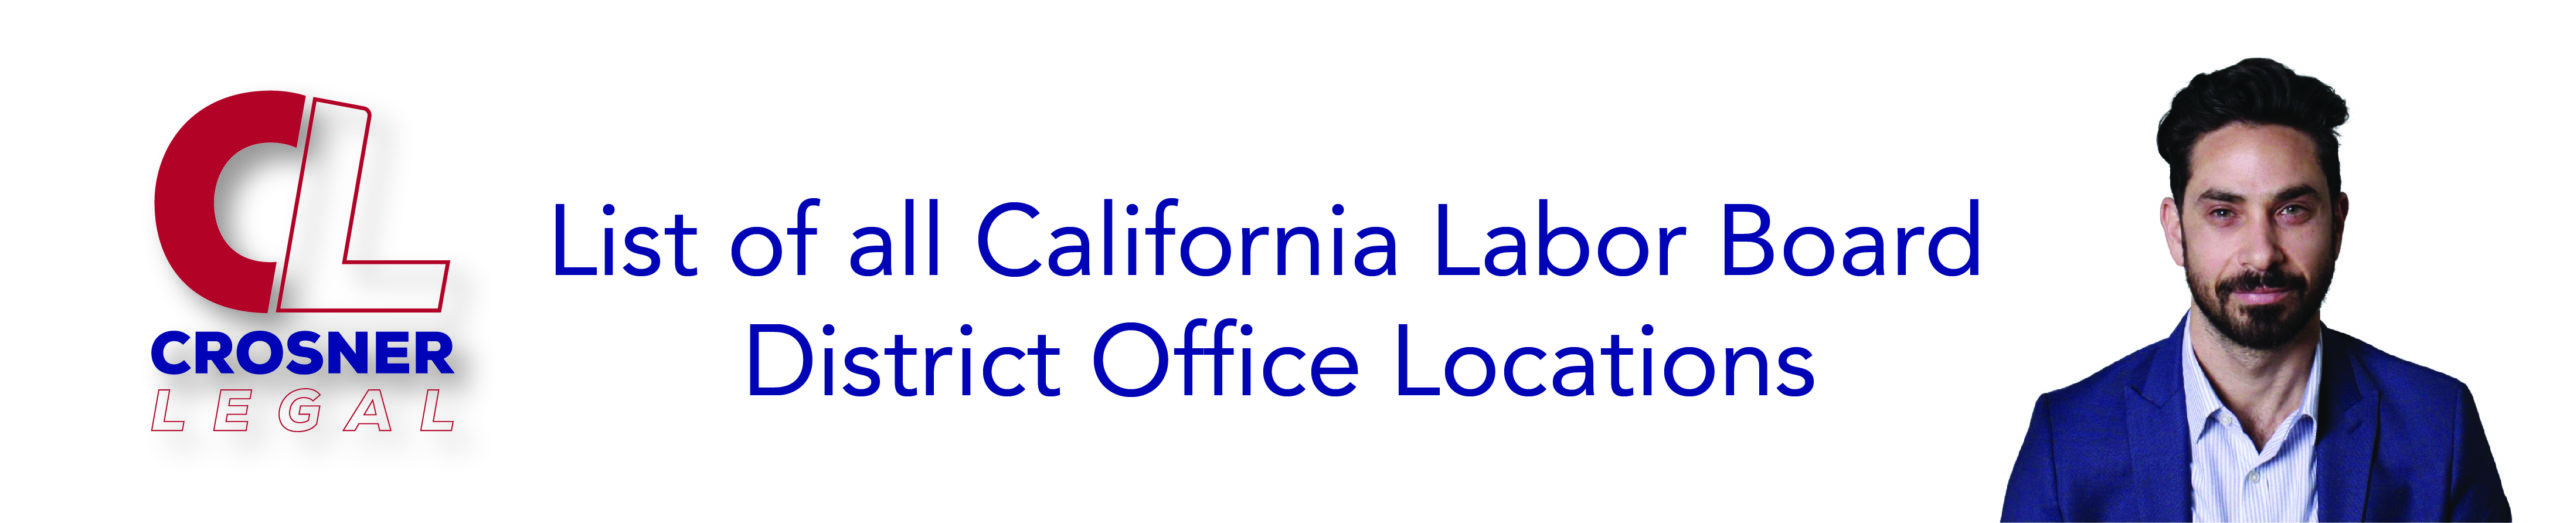 List of all California Labor Board District Office Locations